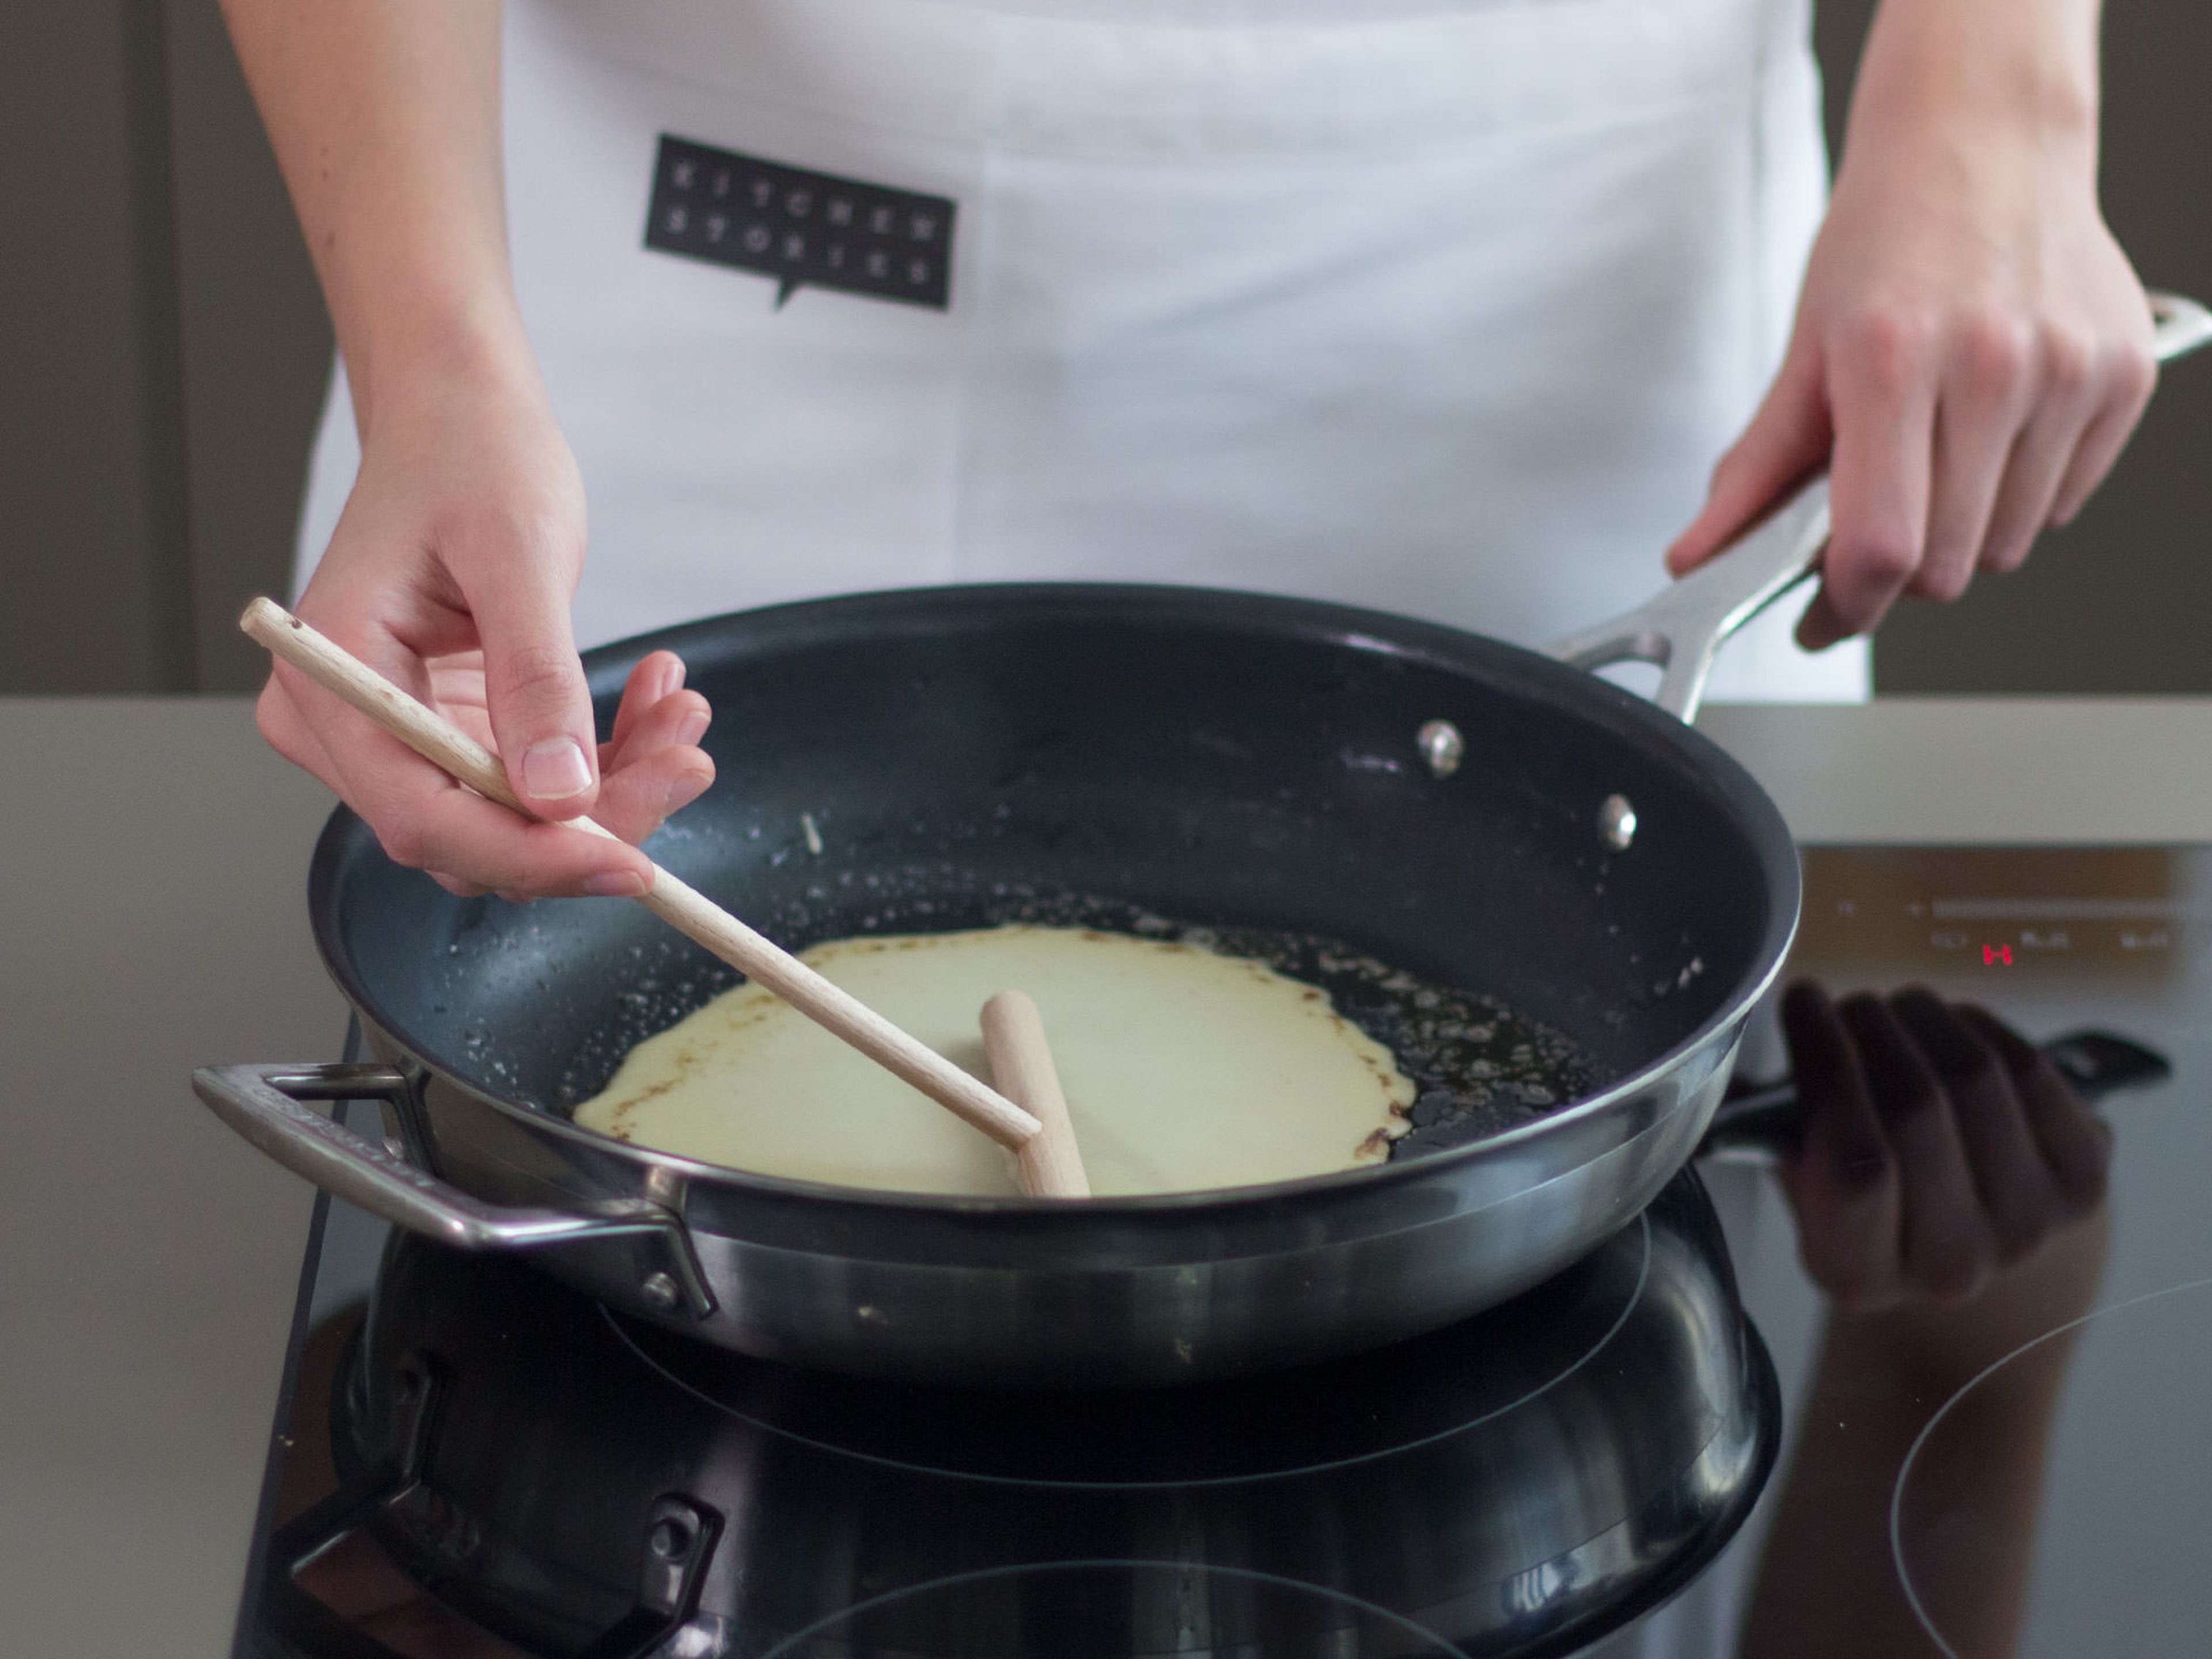 Melt some butter in a large frying pan over medium-high heat and cook crepes for approx. 1 min. per side until golden brown. Transfer to a plate and let cool completely.